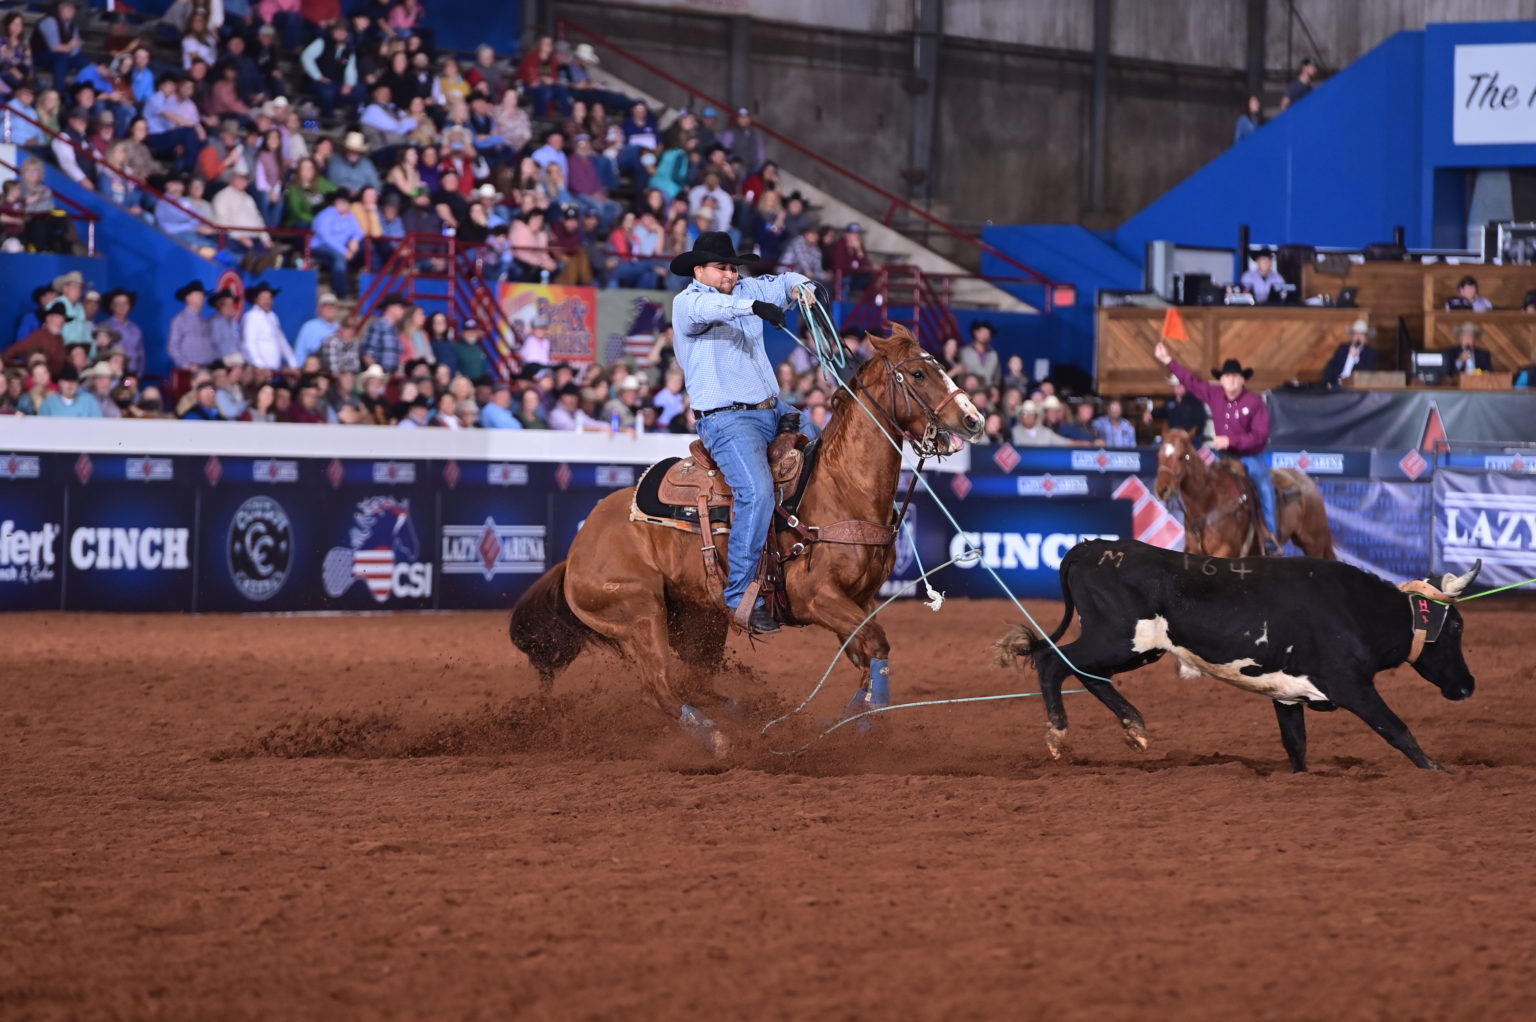 Full List of 2022 Cinch Timed Event Championships Contestants